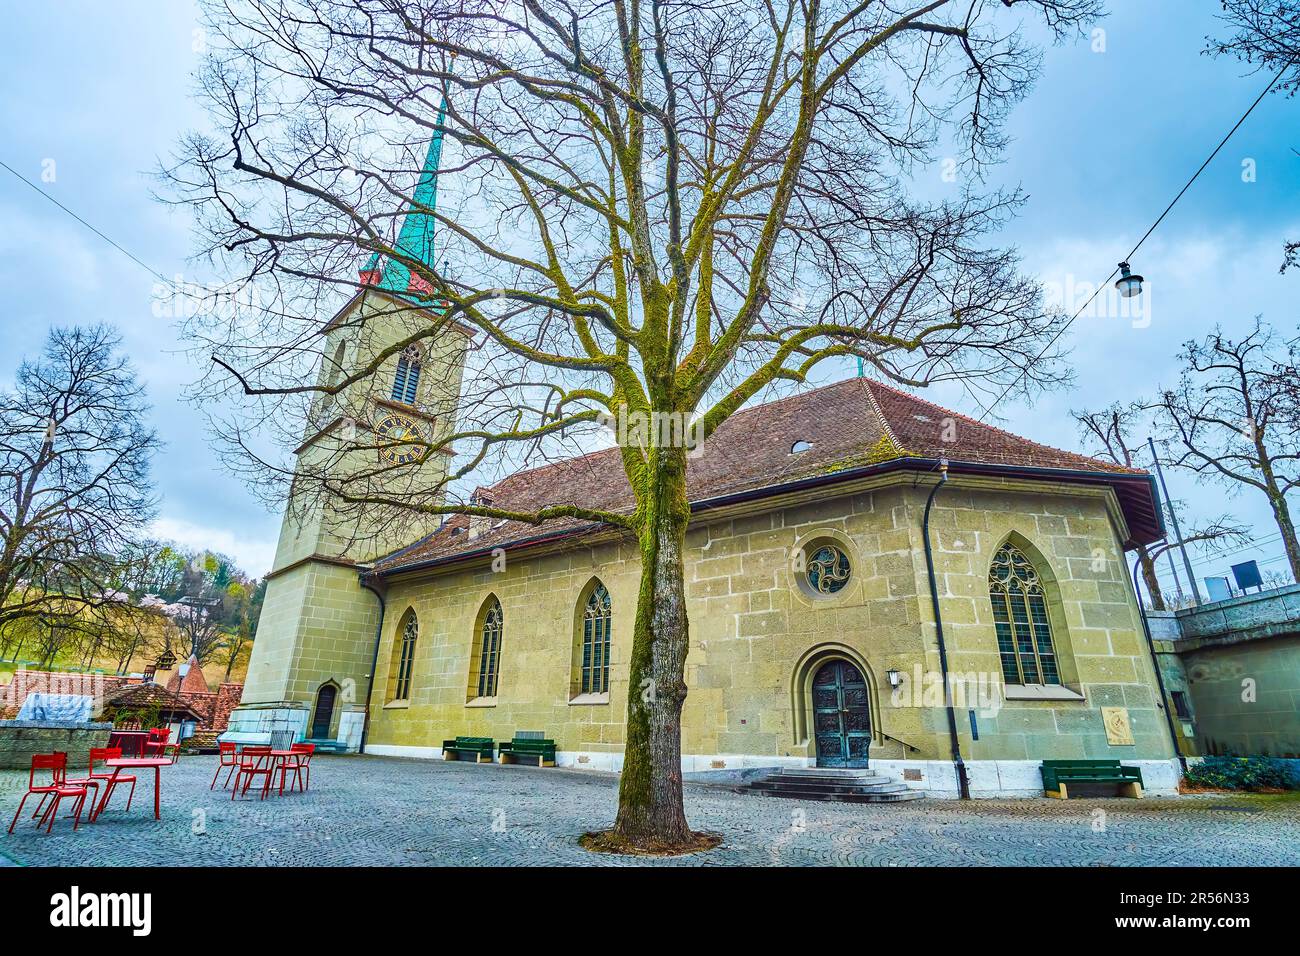 Nydeggkirche, one of the oldest churches, located in Nydegg district of Bern, Switzerland Stock Photo